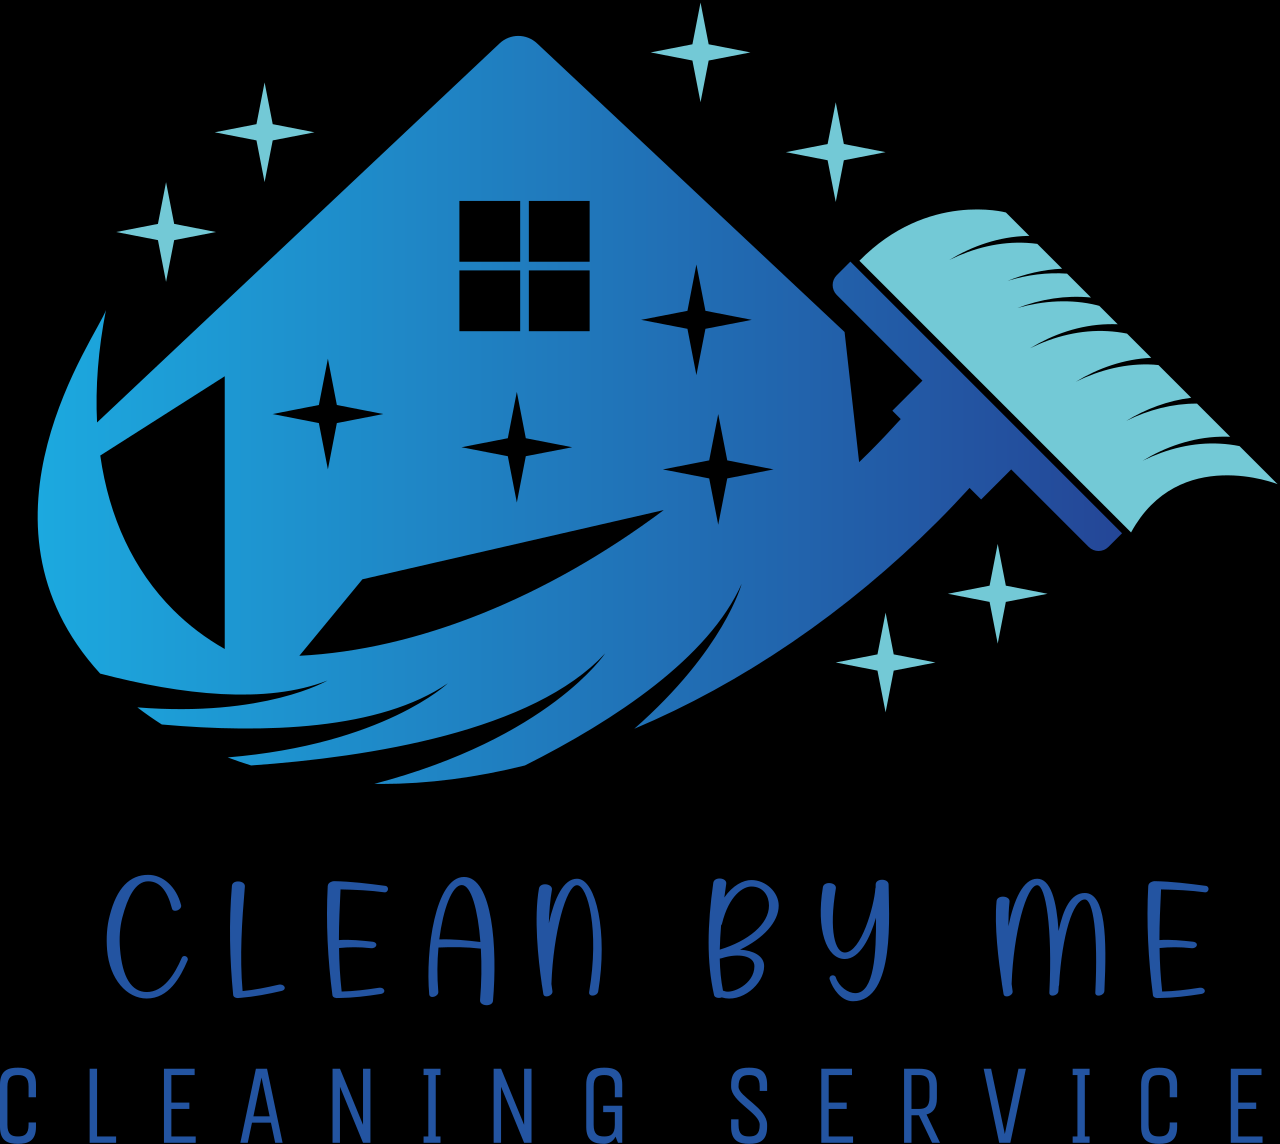 Clean by me's logo